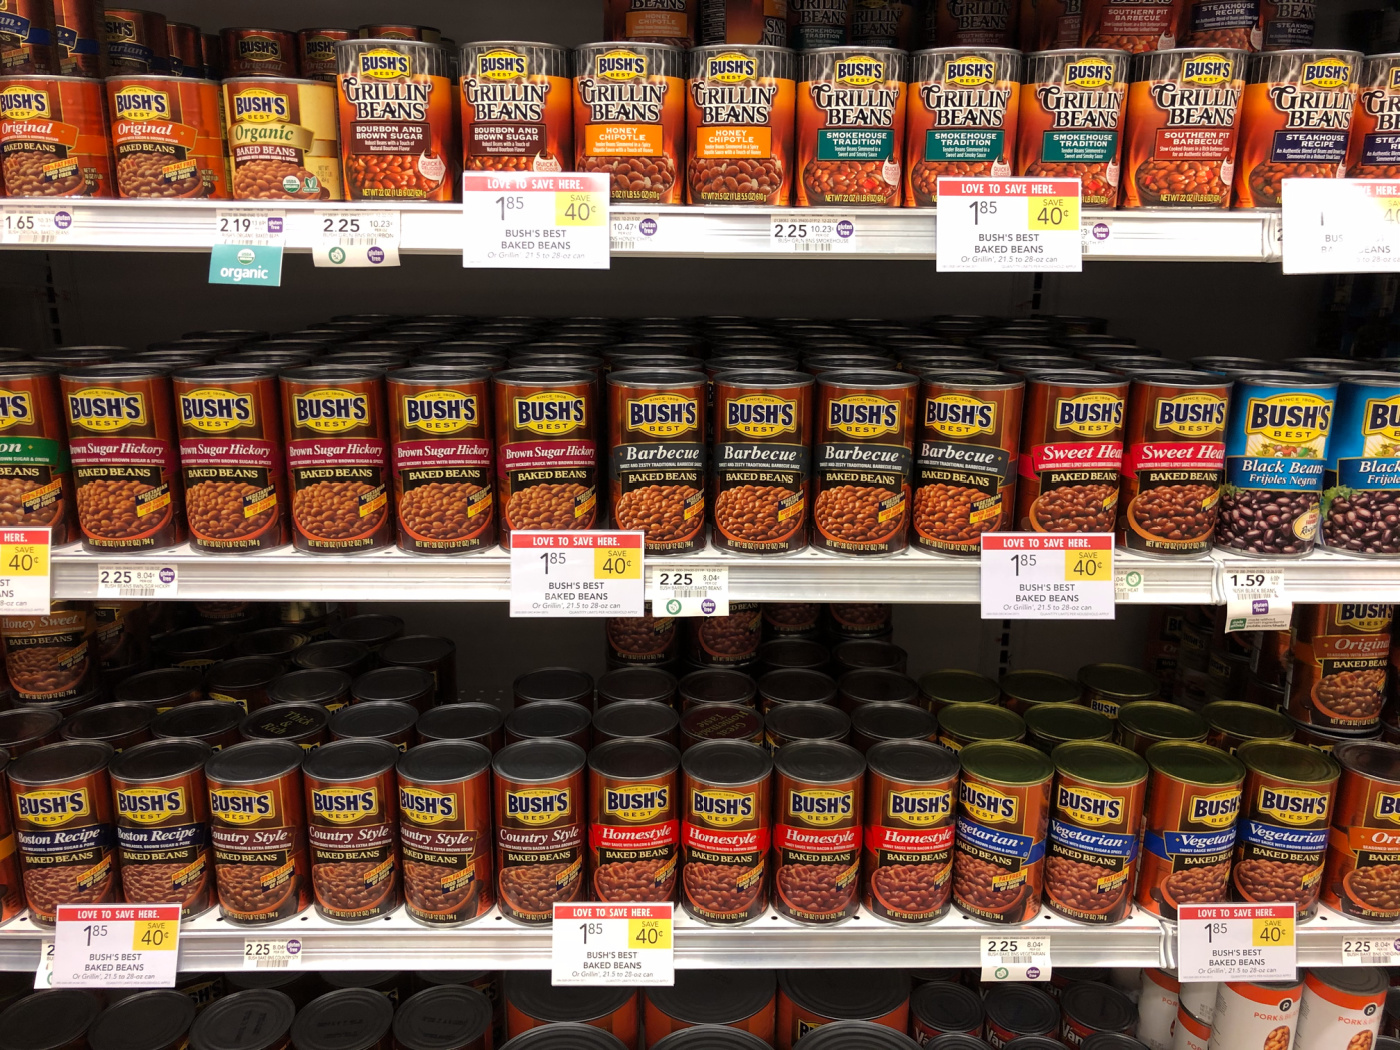 Bush's Baked Beans Are A Summer Cookout Staple - Save On All Your Faves NOW At Publix! on I Heart Publix